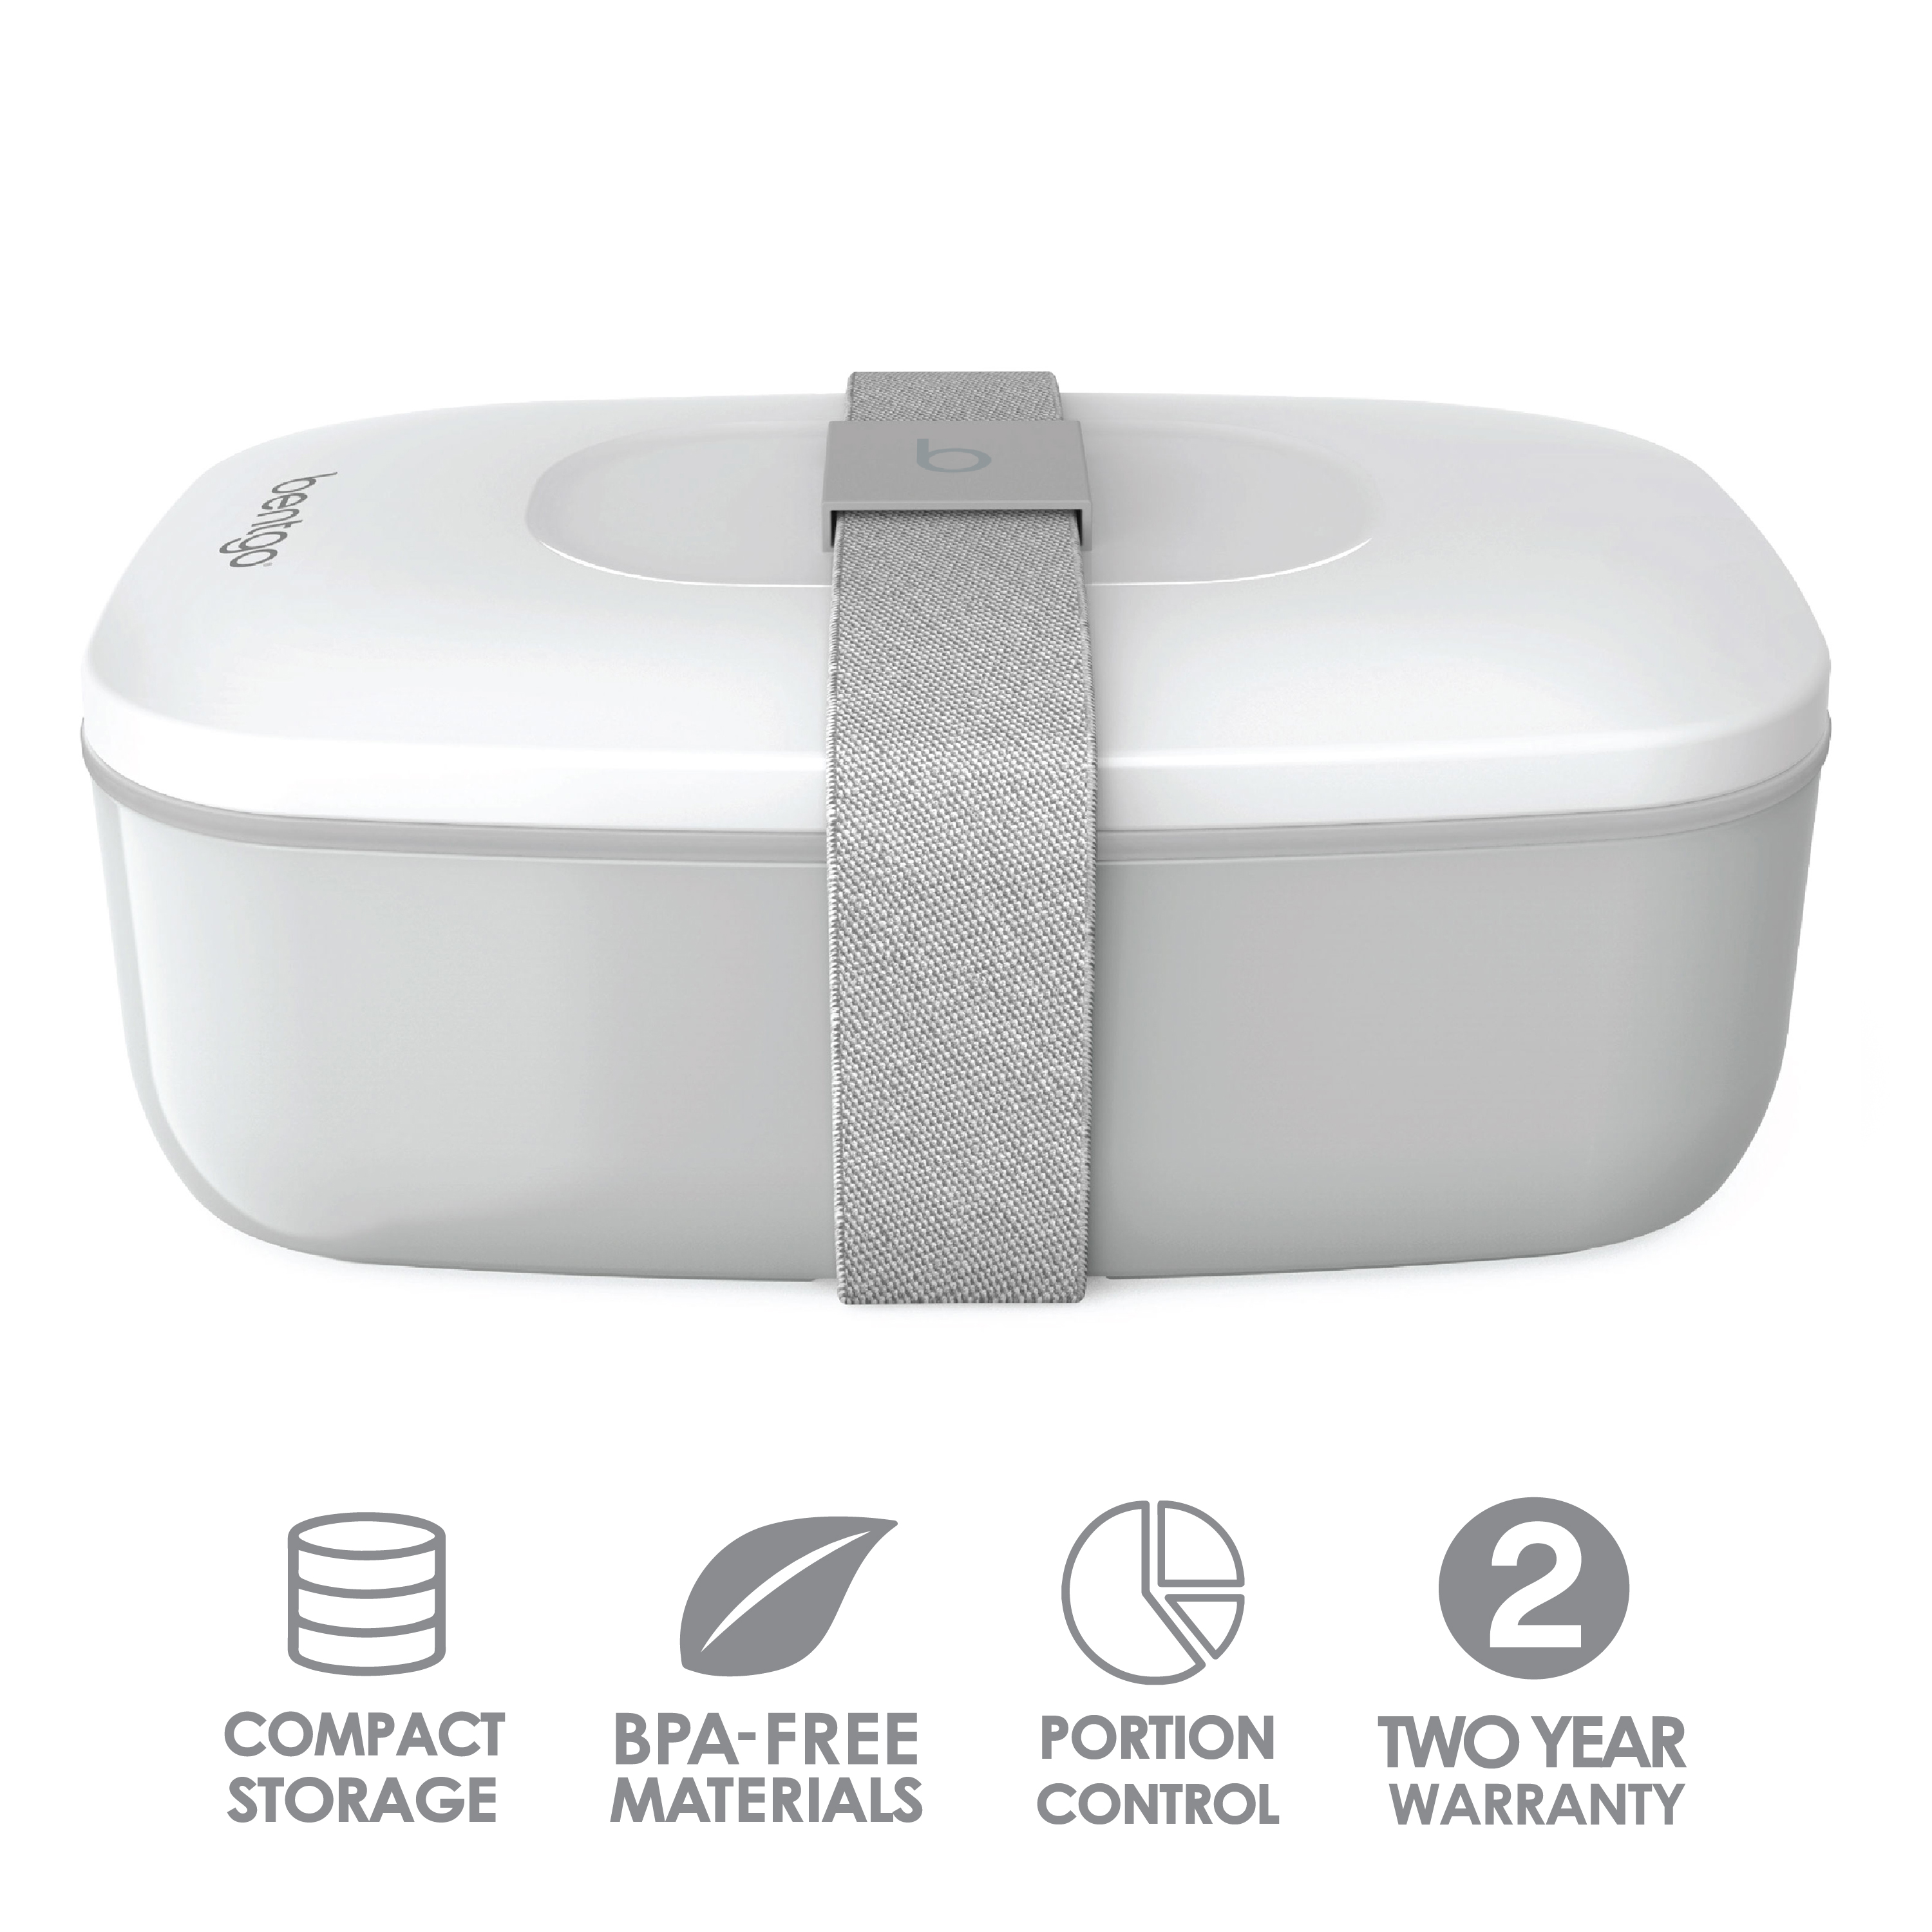 Bentgo Classic (Gray) - All-in-One Stackable Lunch Box Solution - Sleek and Modern Bento Box Design Includes 2 Stackable Containers, Built-in Plastic Silverware, and Sealing Strap - image 5 of 6